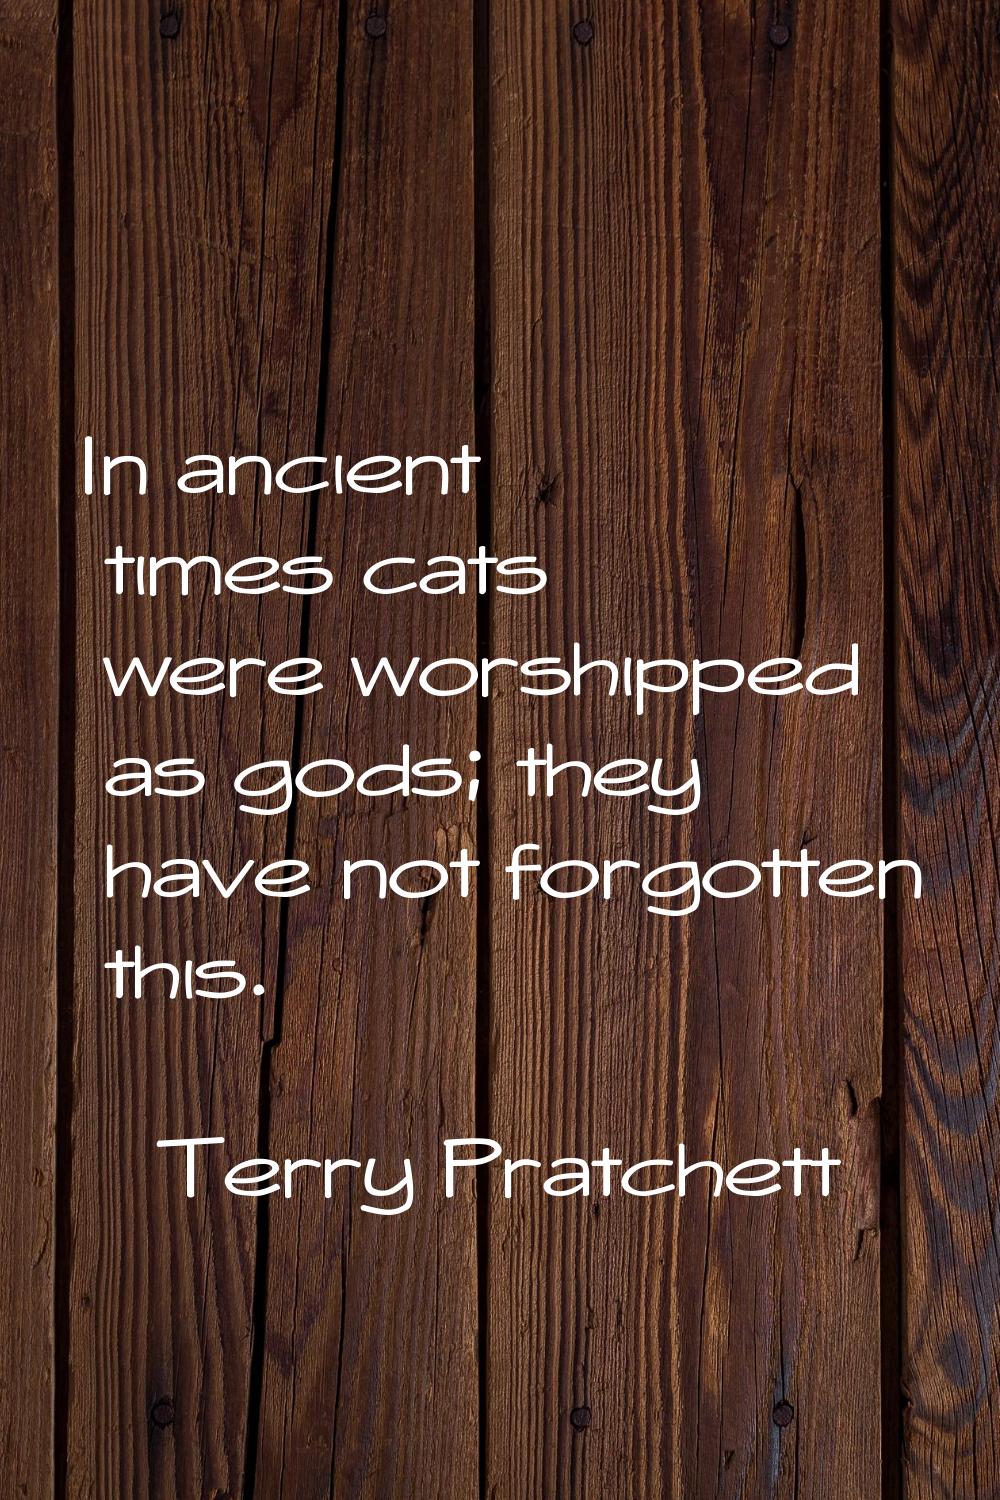 In ancient times cats were worshipped as gods; they have not forgotten this.